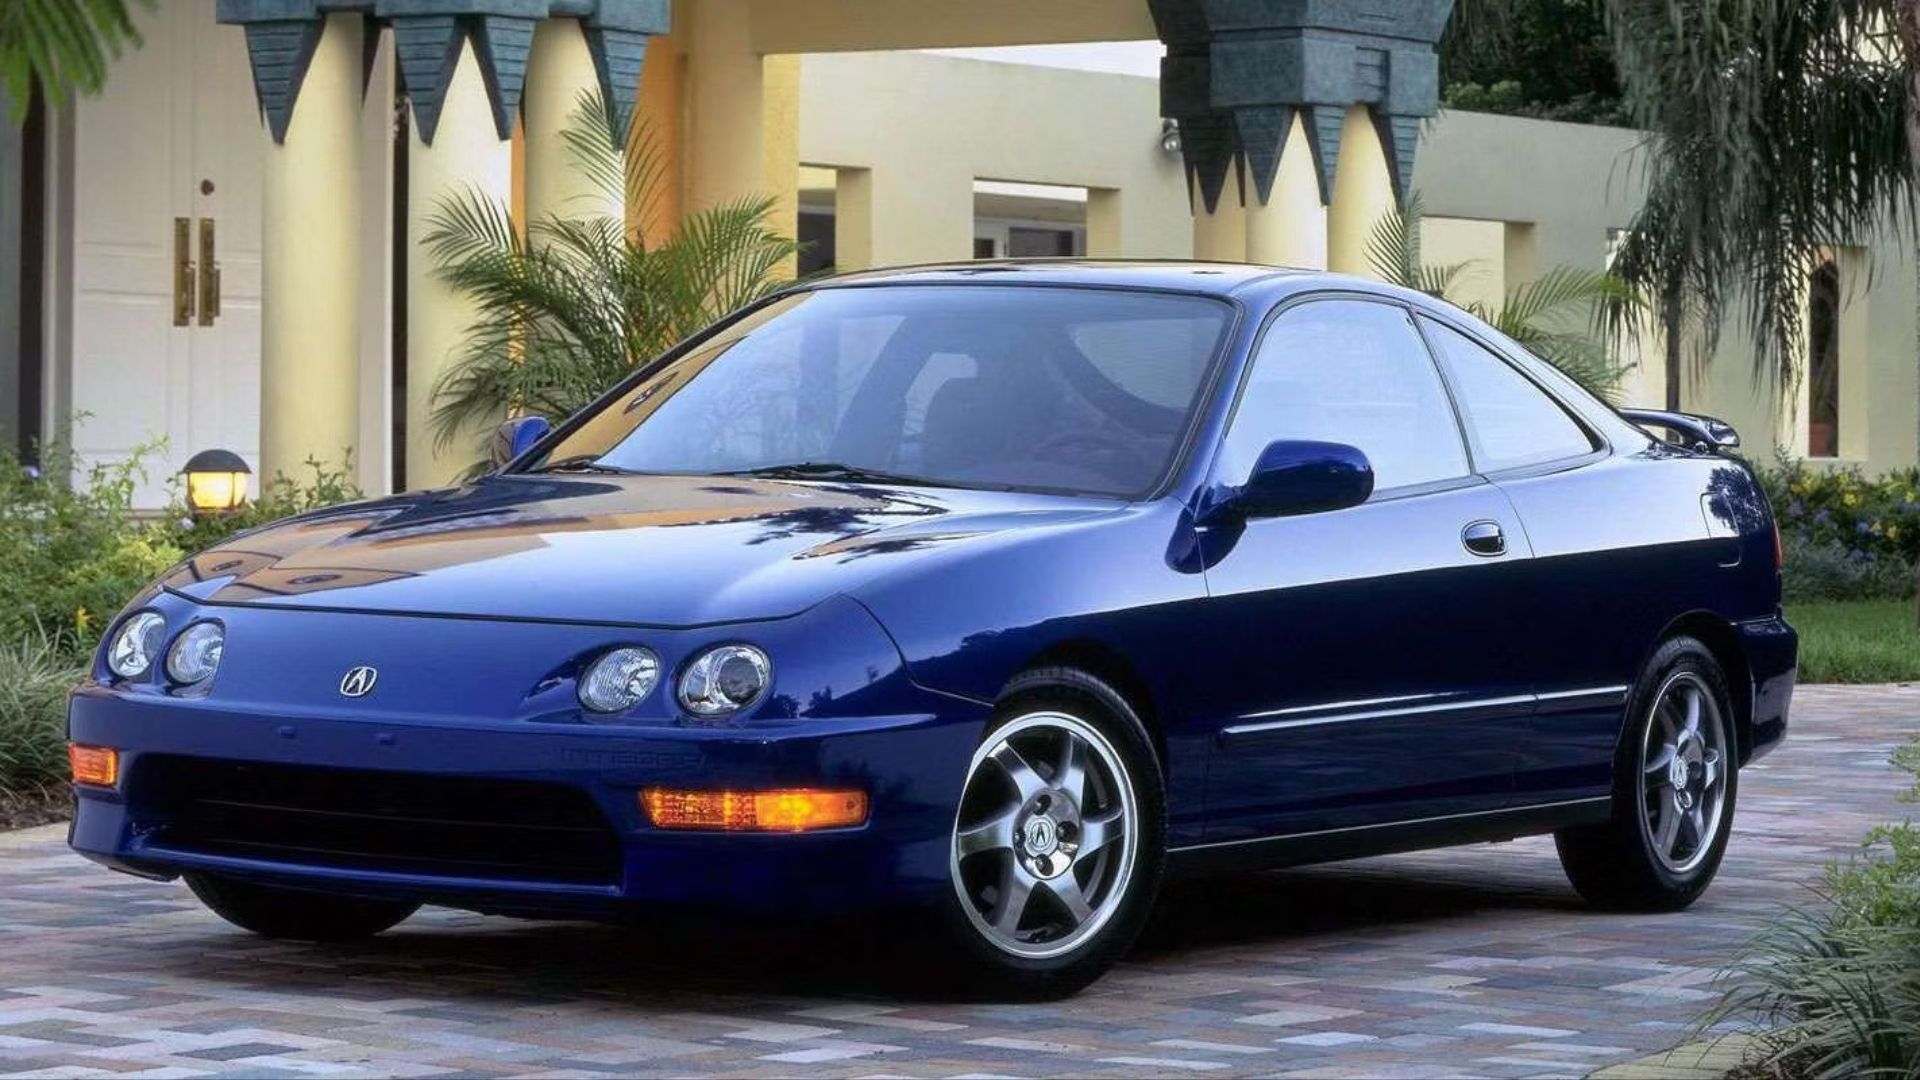 2001 Acura Integra Front View